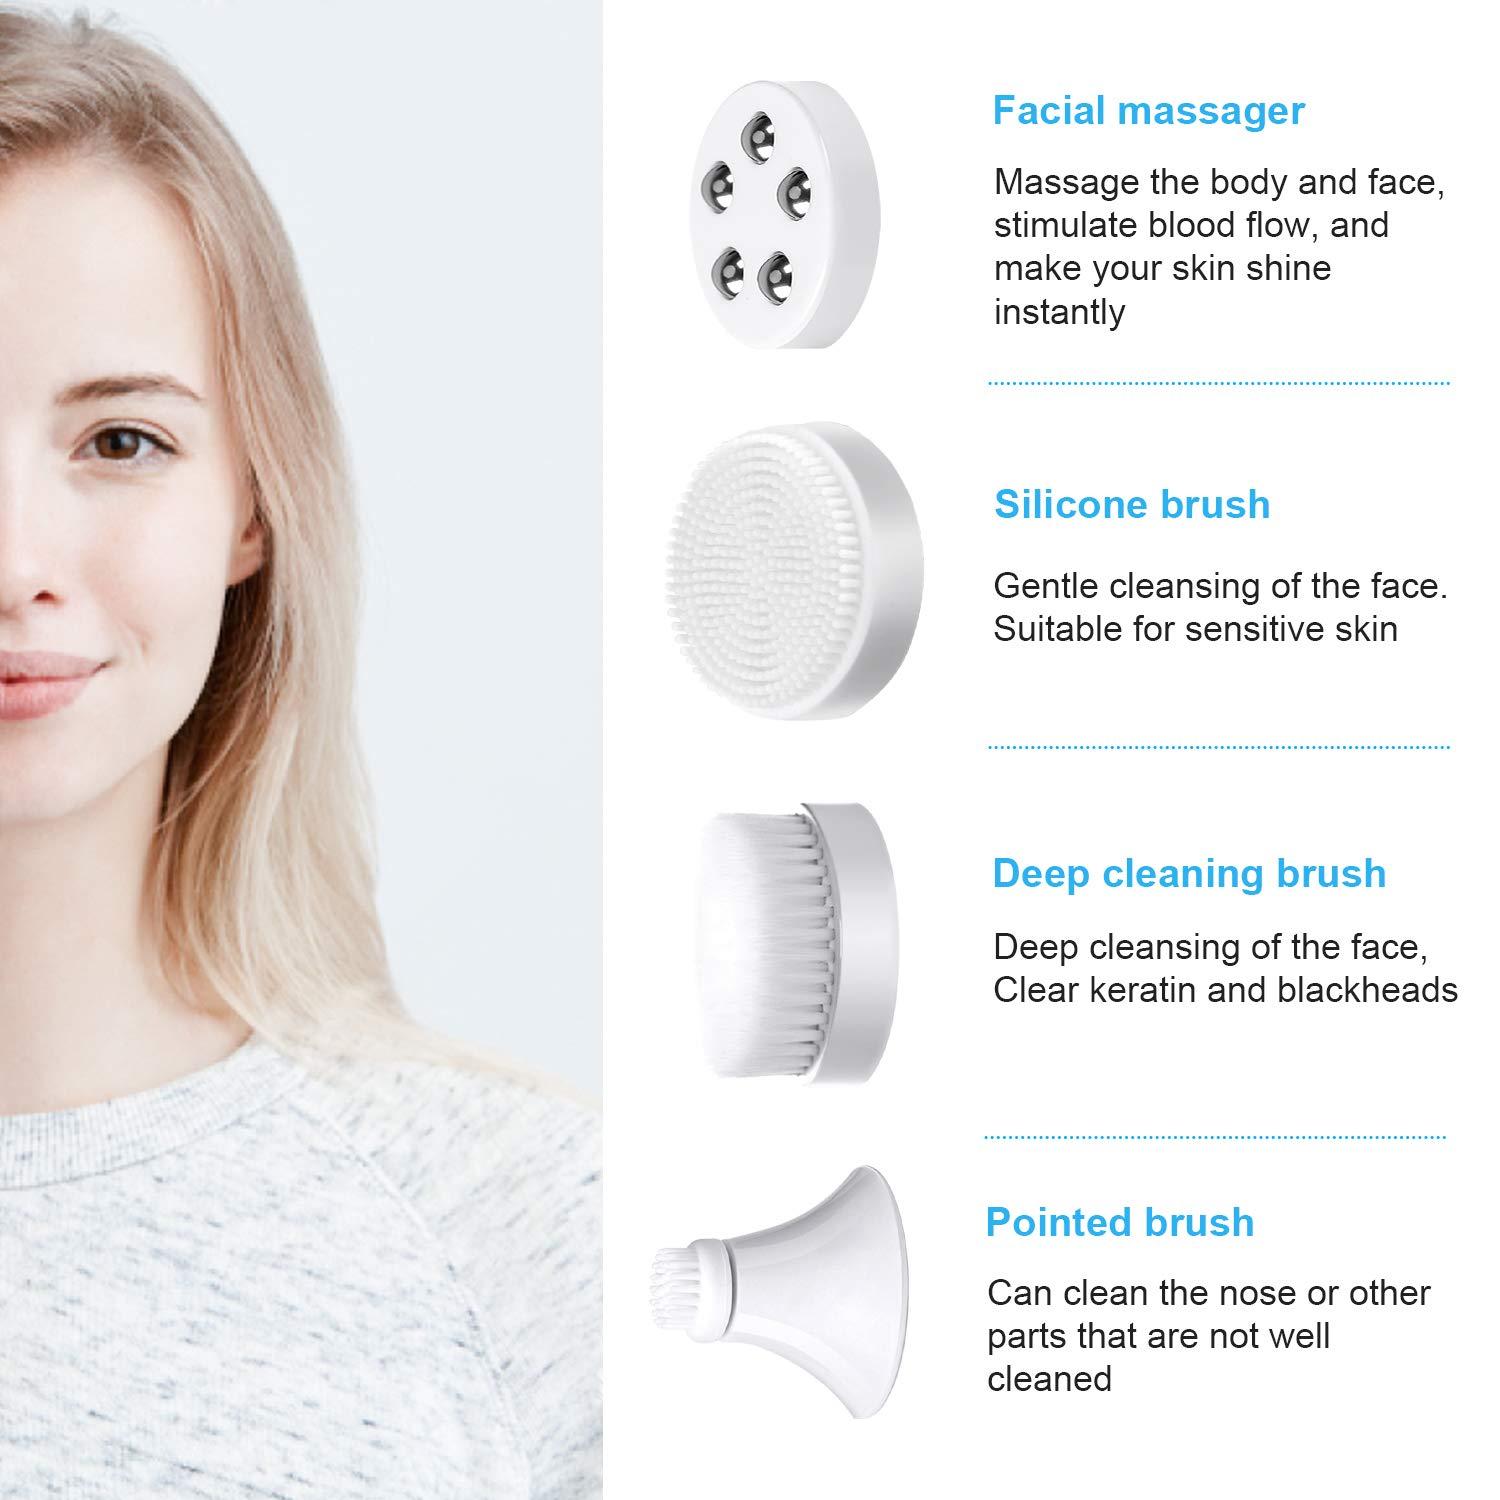 Sonic Facial Cleansing Brush Exfoliator Waterproof Face Scrubber Skin Care Tools Facial Massger For Dropshipping